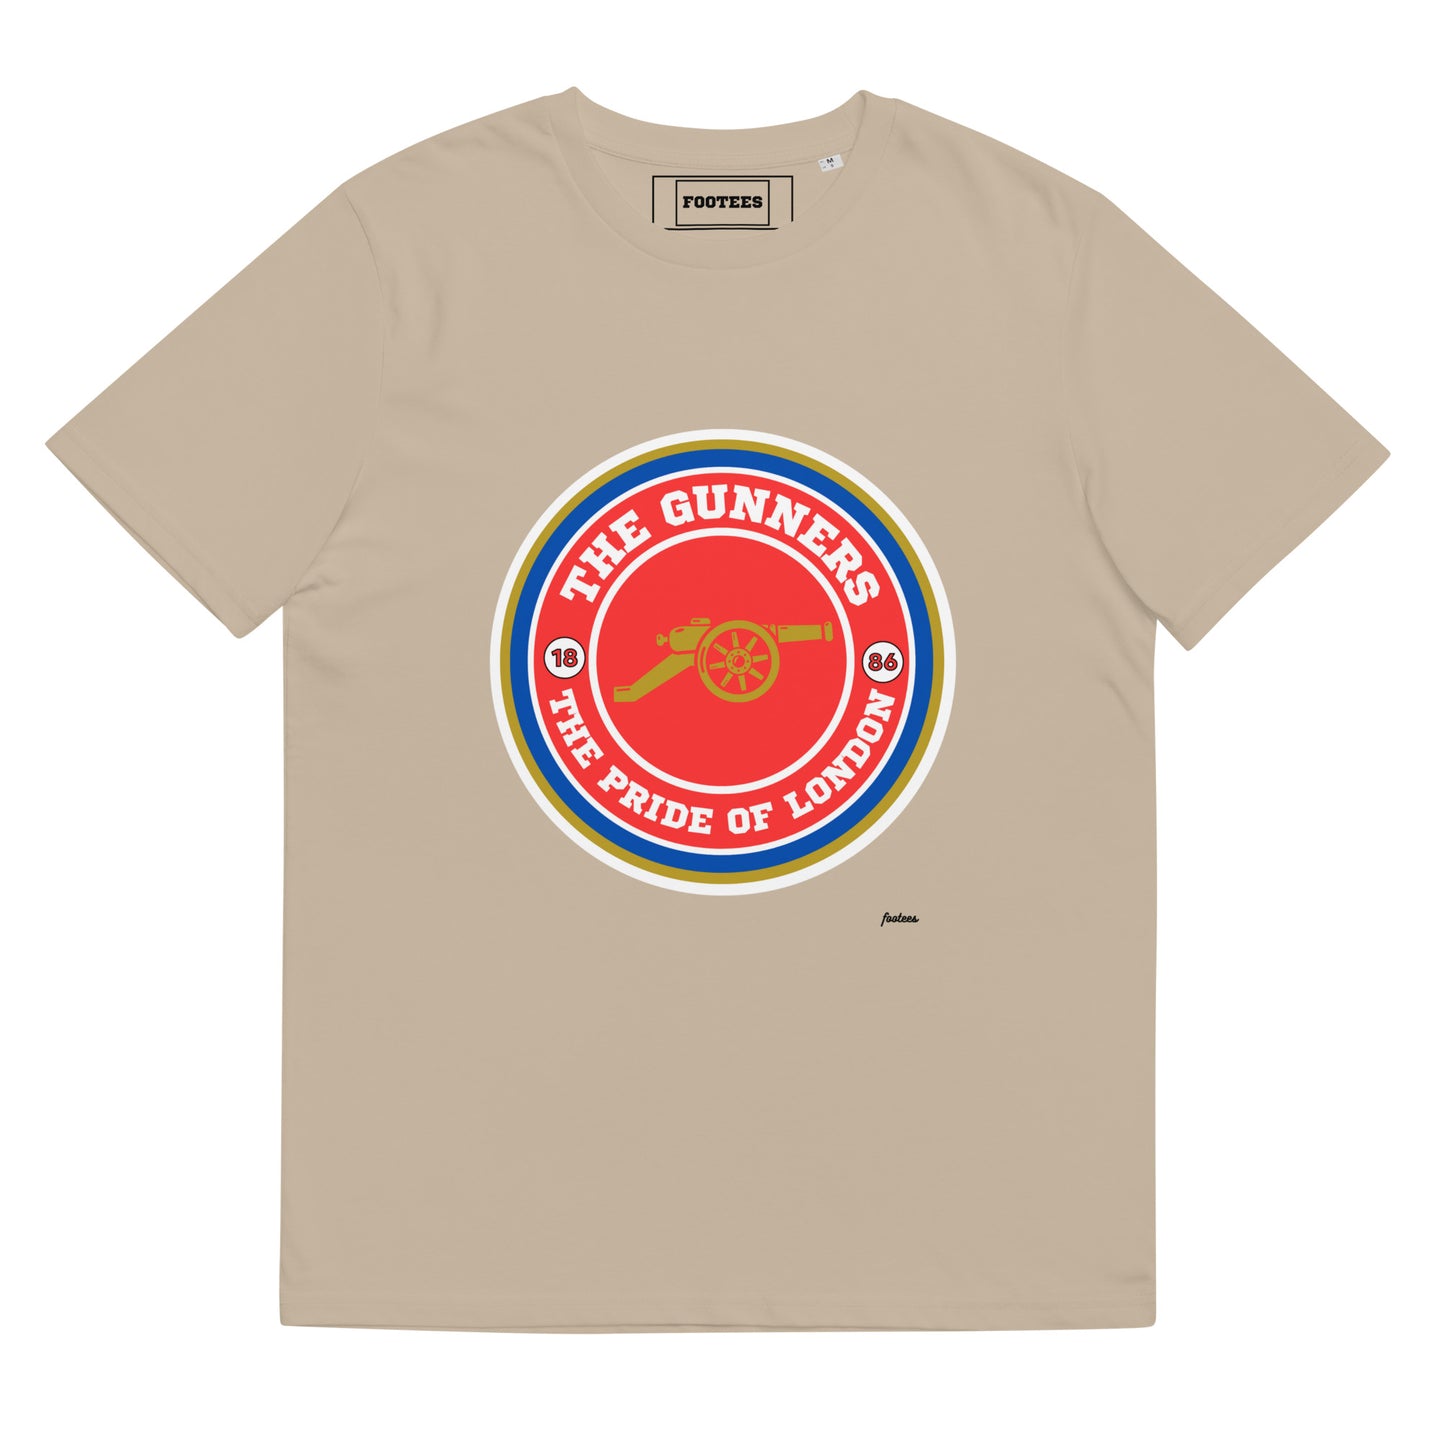 The Pride of London AFC Tee